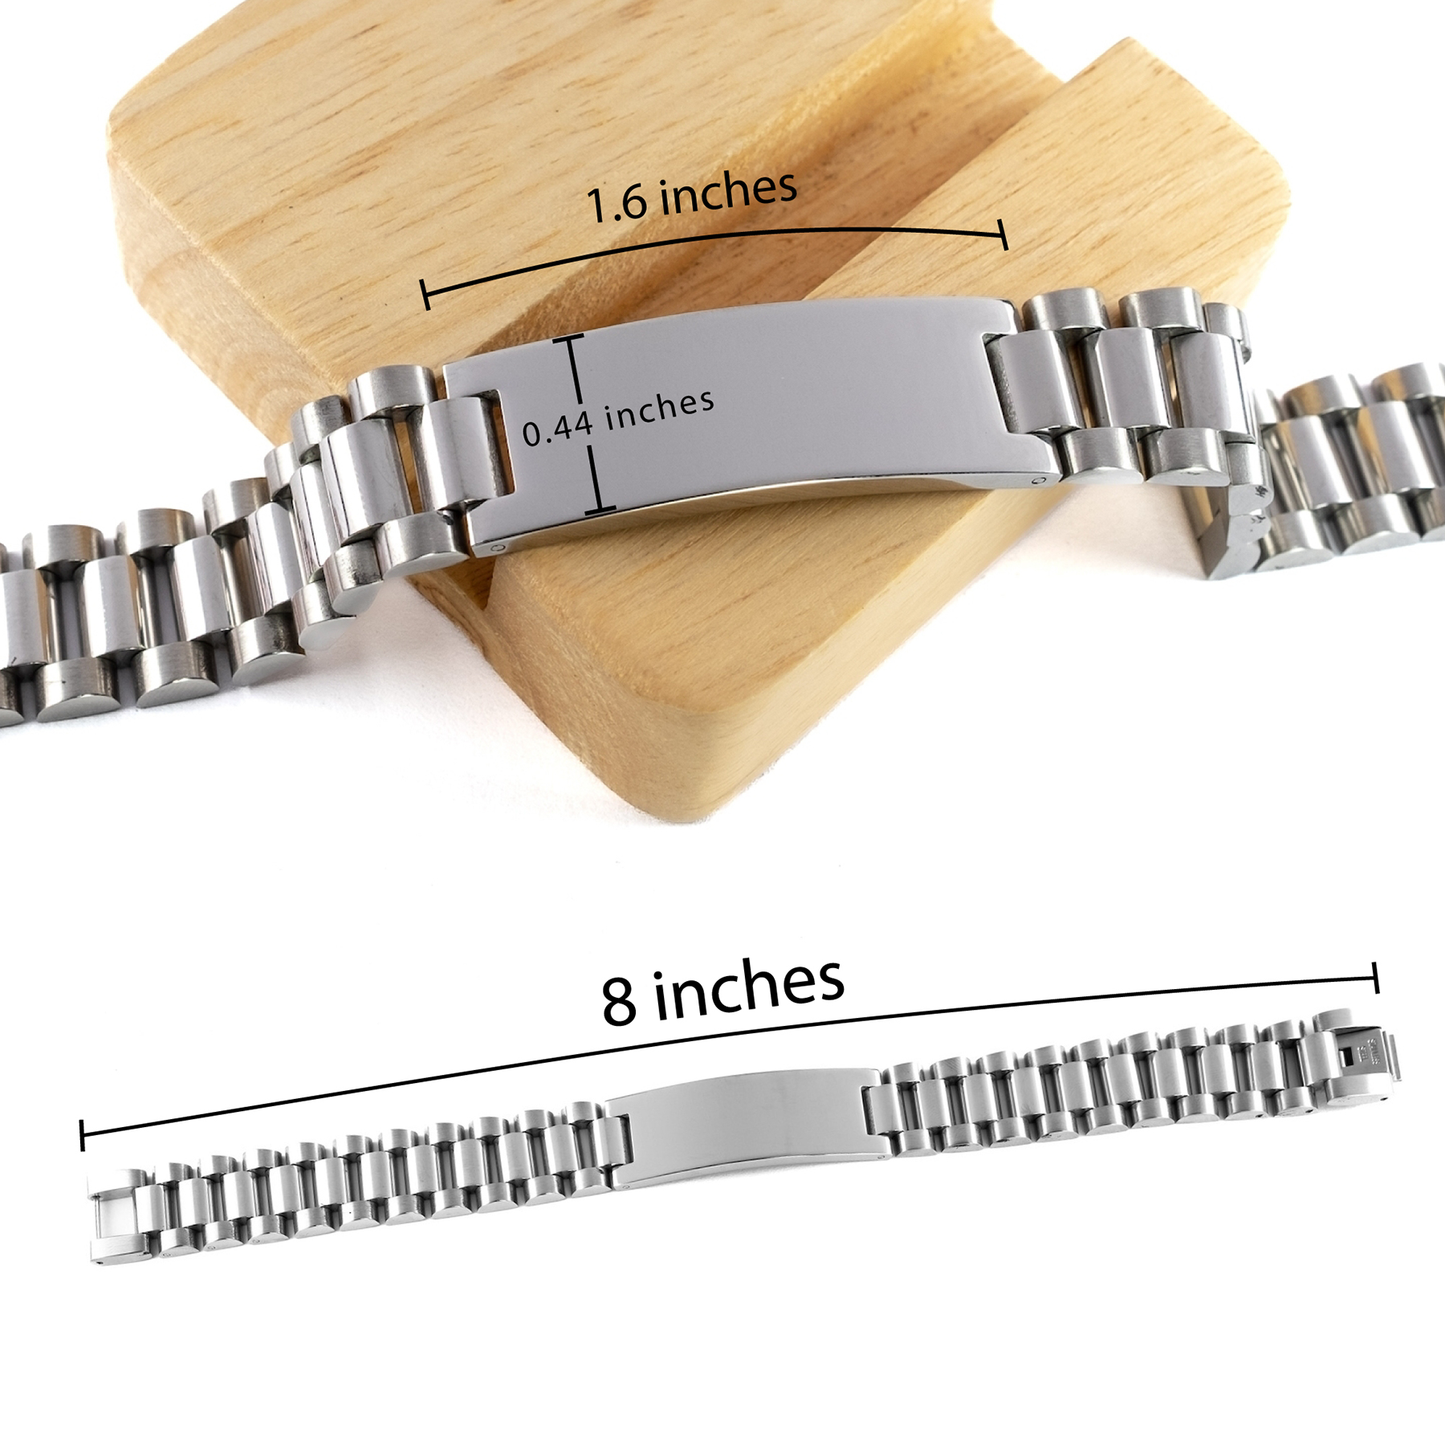 Ladder Stainless Steel Bracelet for Wife - You always hold a special place in my heart - Unique Stainless Steel Gift for Wifes Birthday, Christmas, and Valentines Day - Engraved Bracelet for Wife